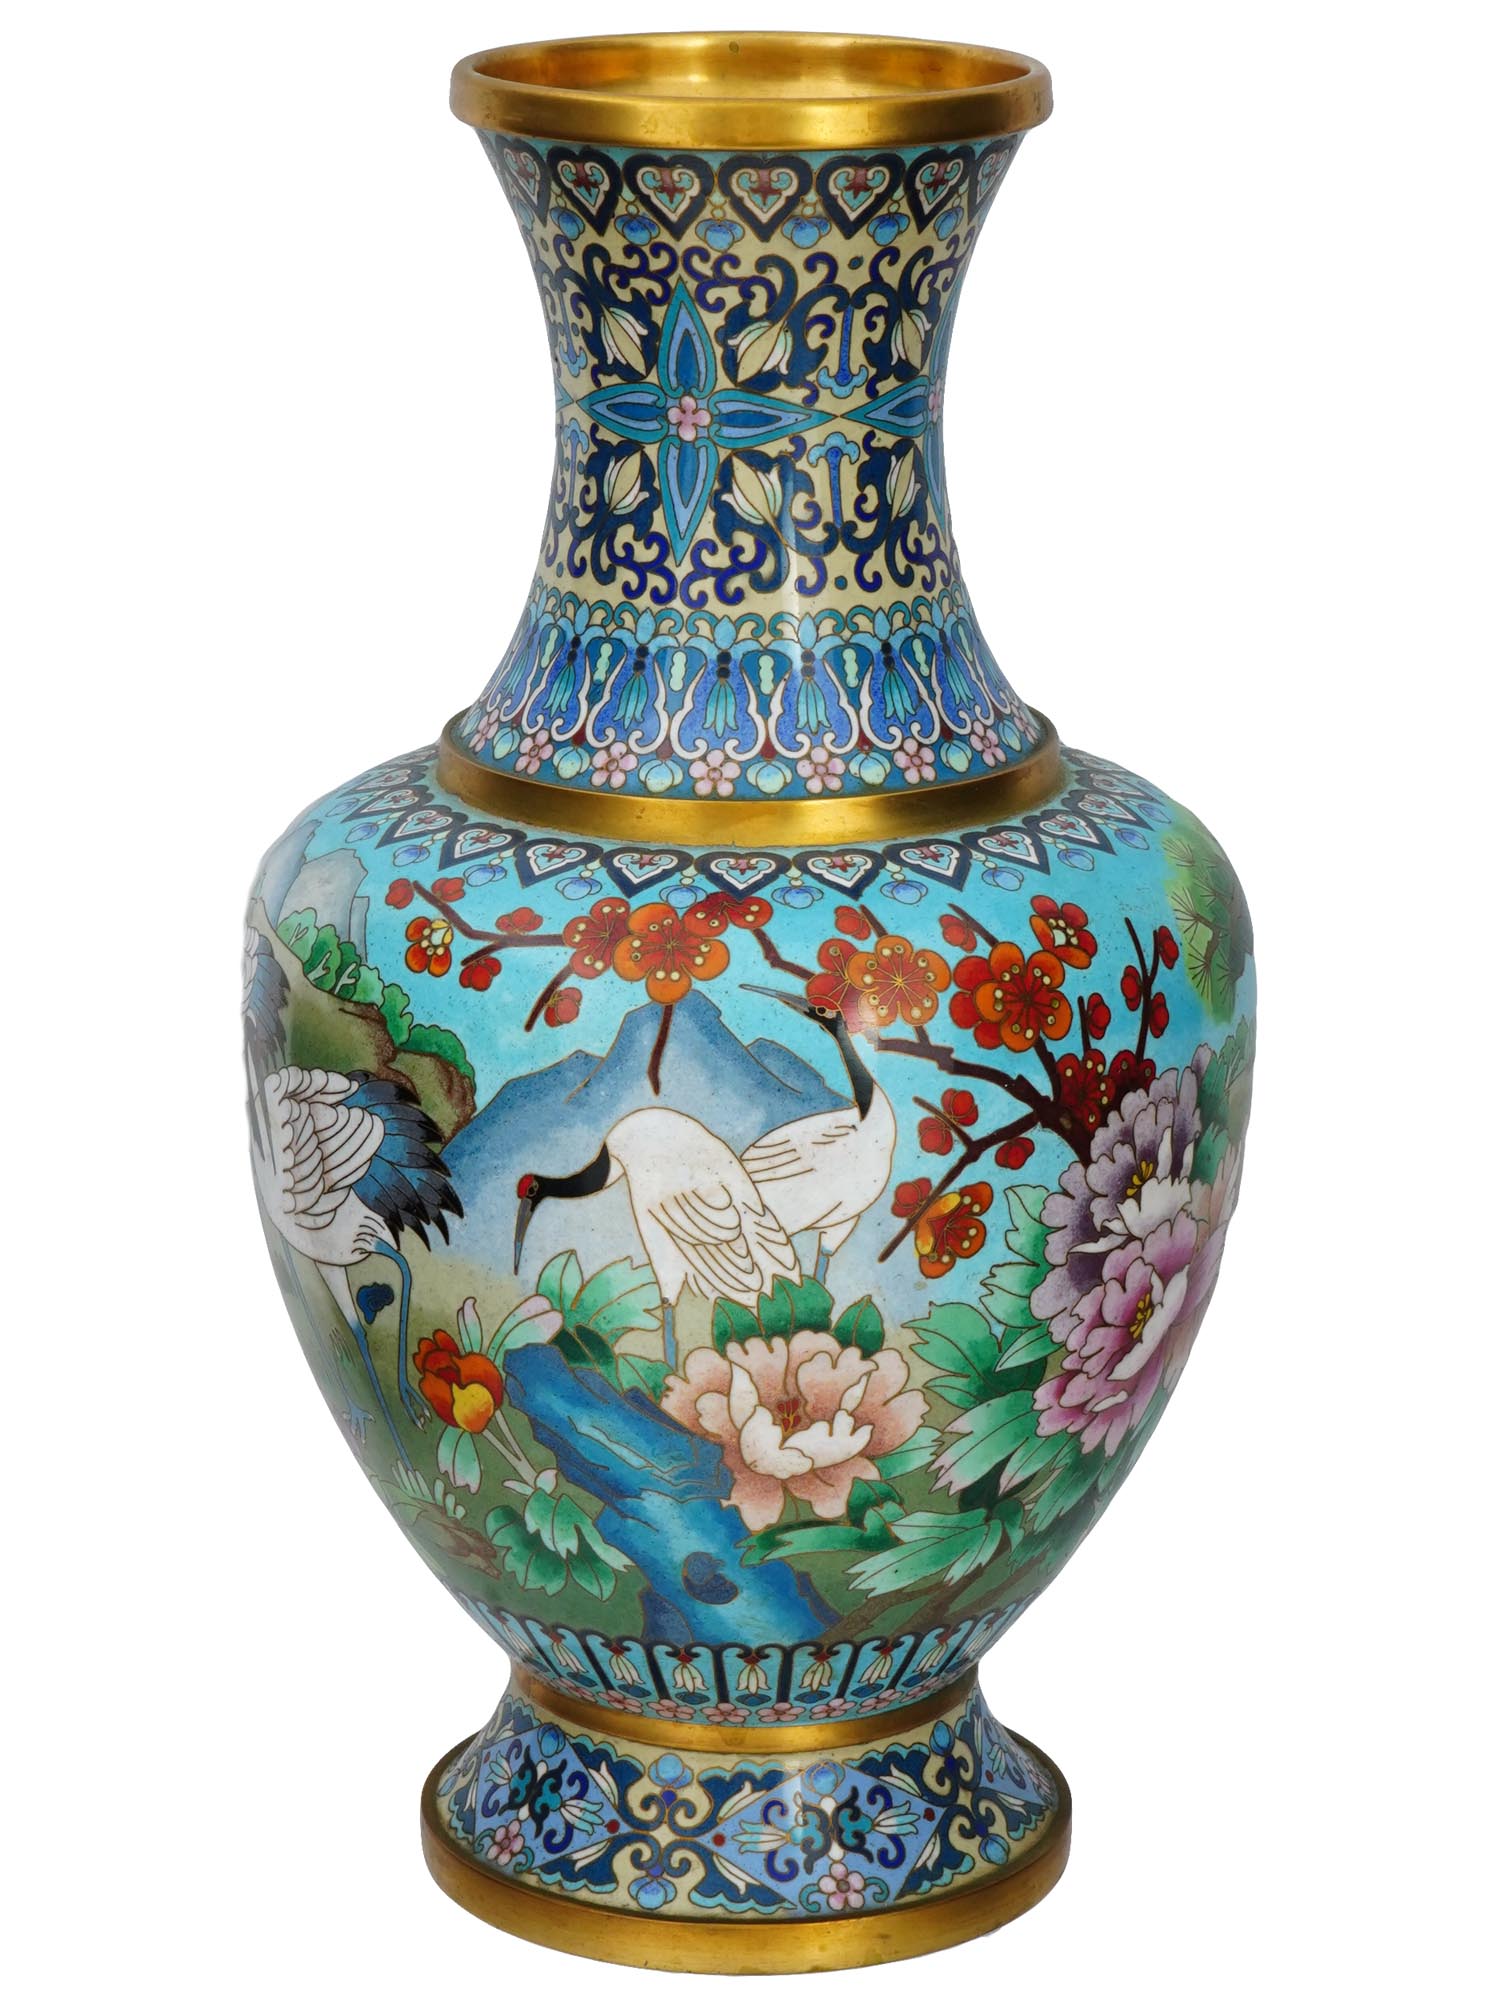 ANTIQUE CHINESE QING CLOISONNE ENAMEL VASE WITH BIRDS PIC-0